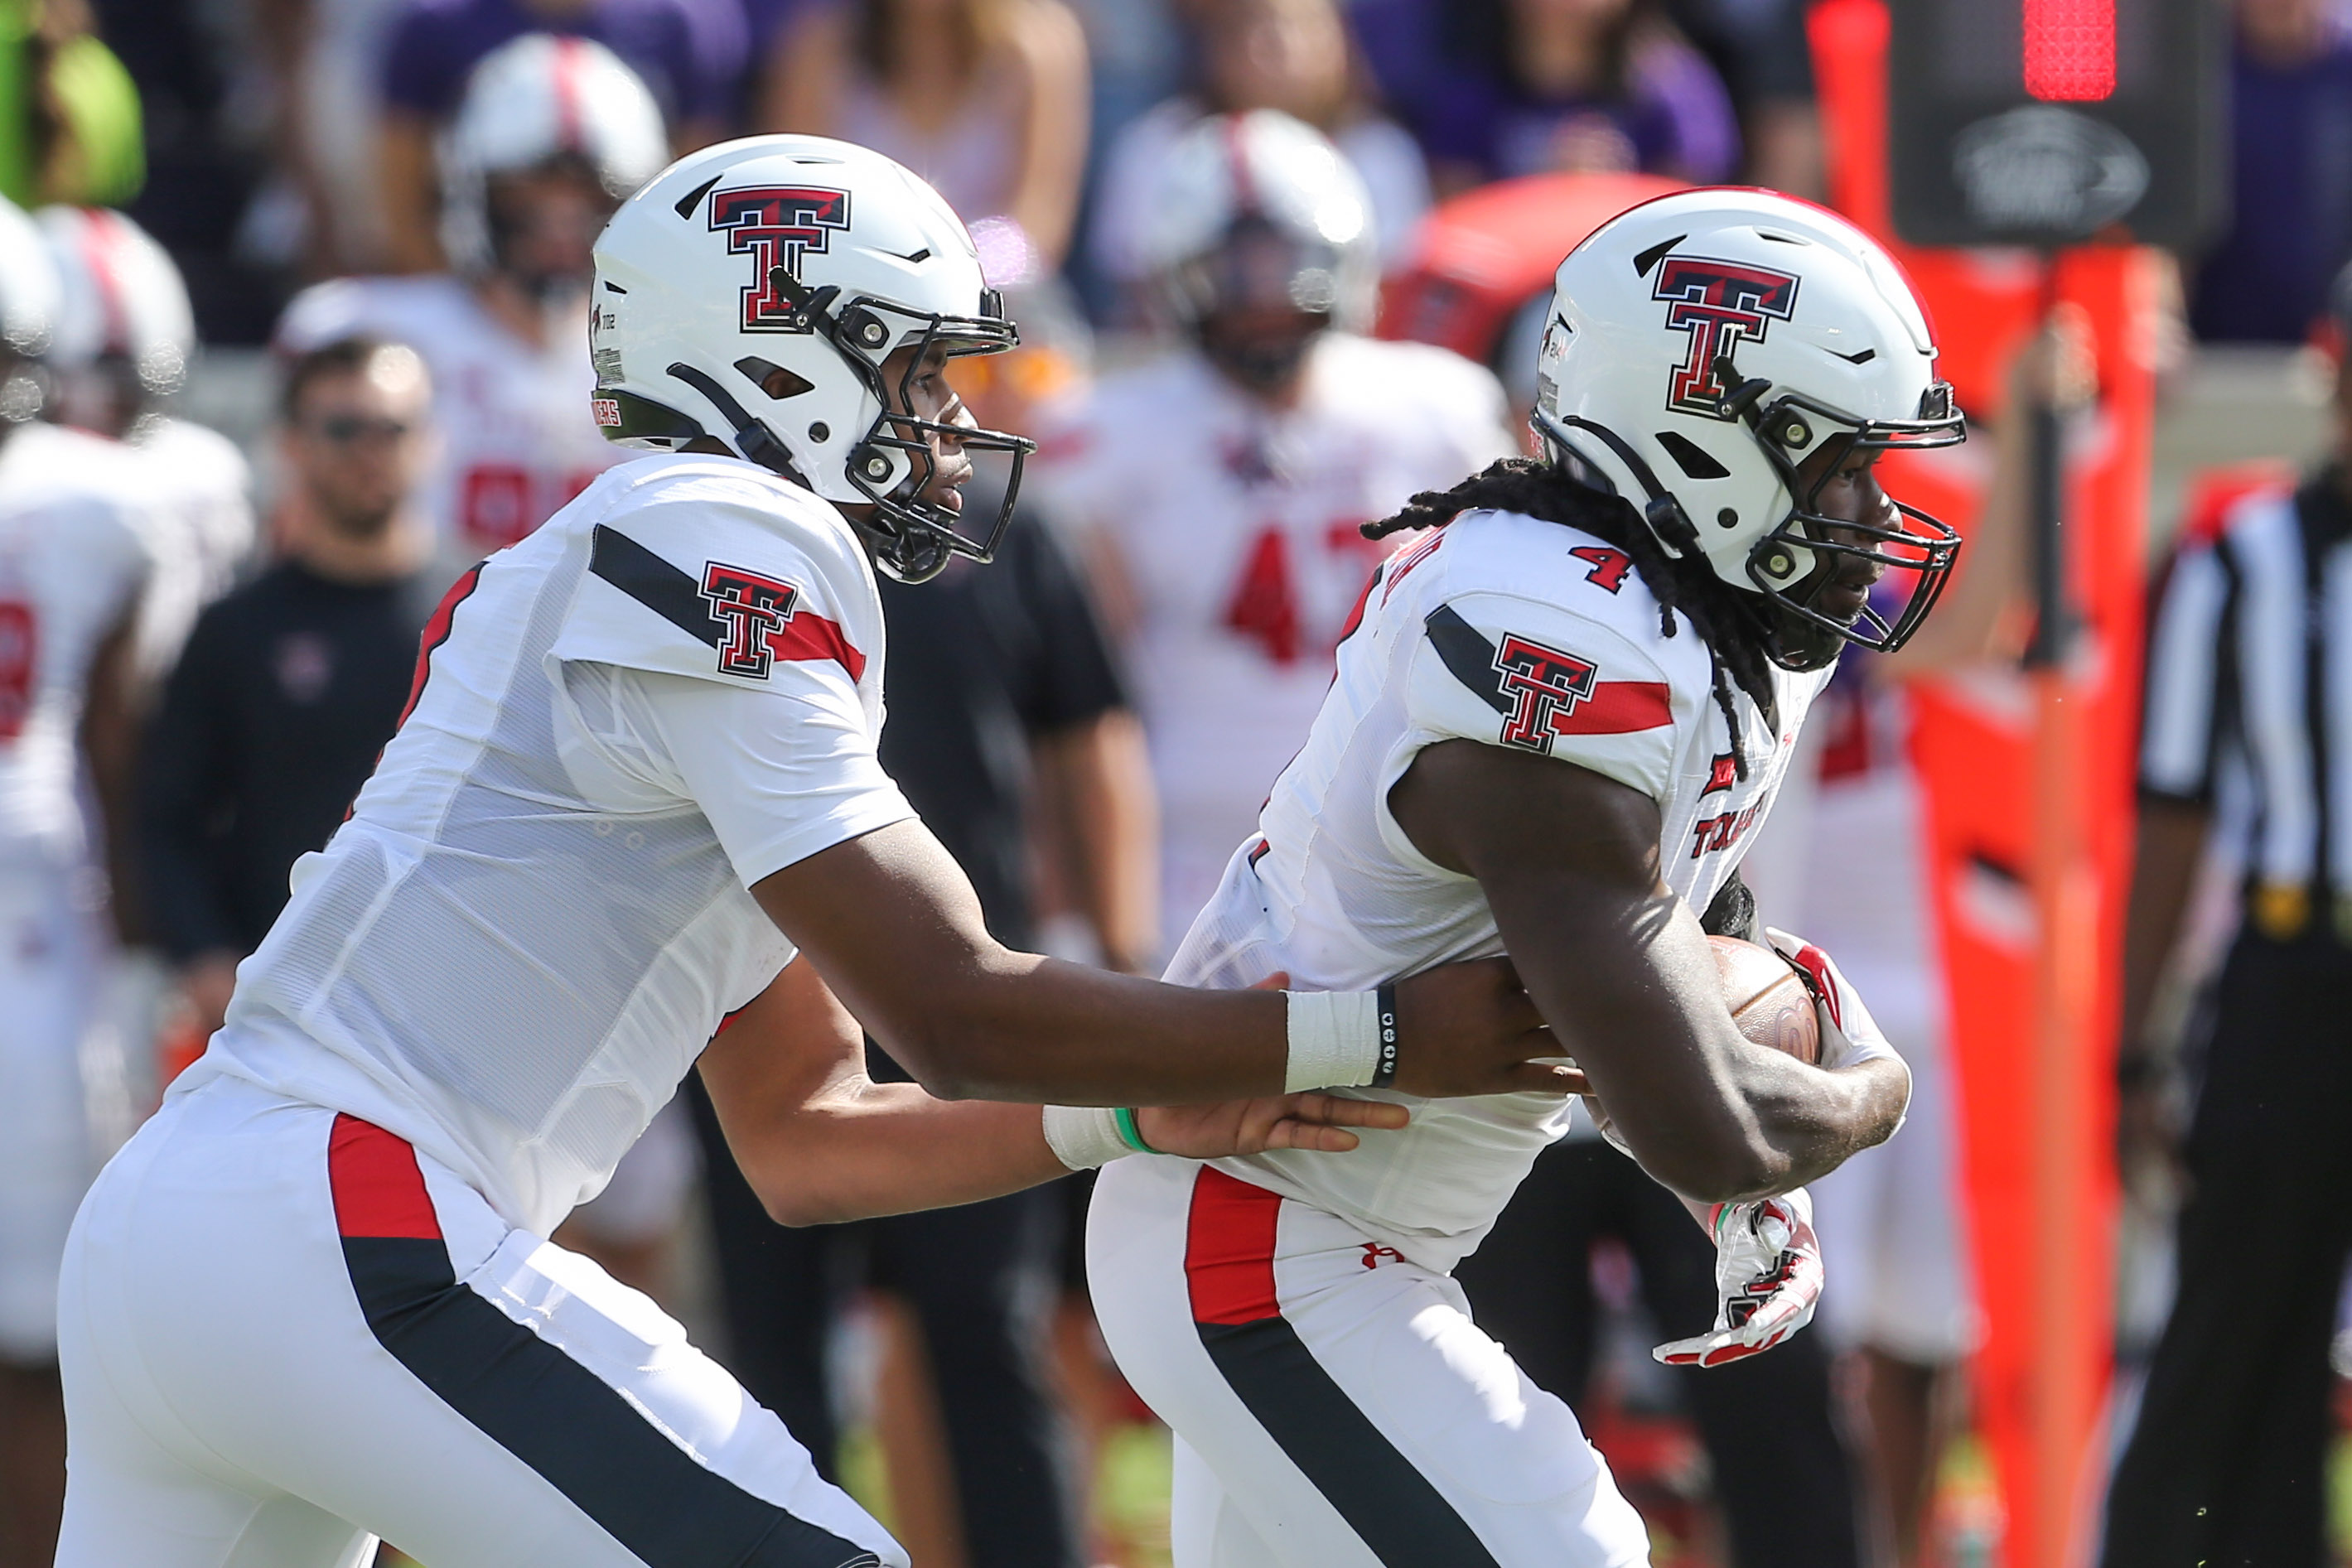 How to Watch, Listen, and Stream Red Raiders vs. West Virginia Mountaineers